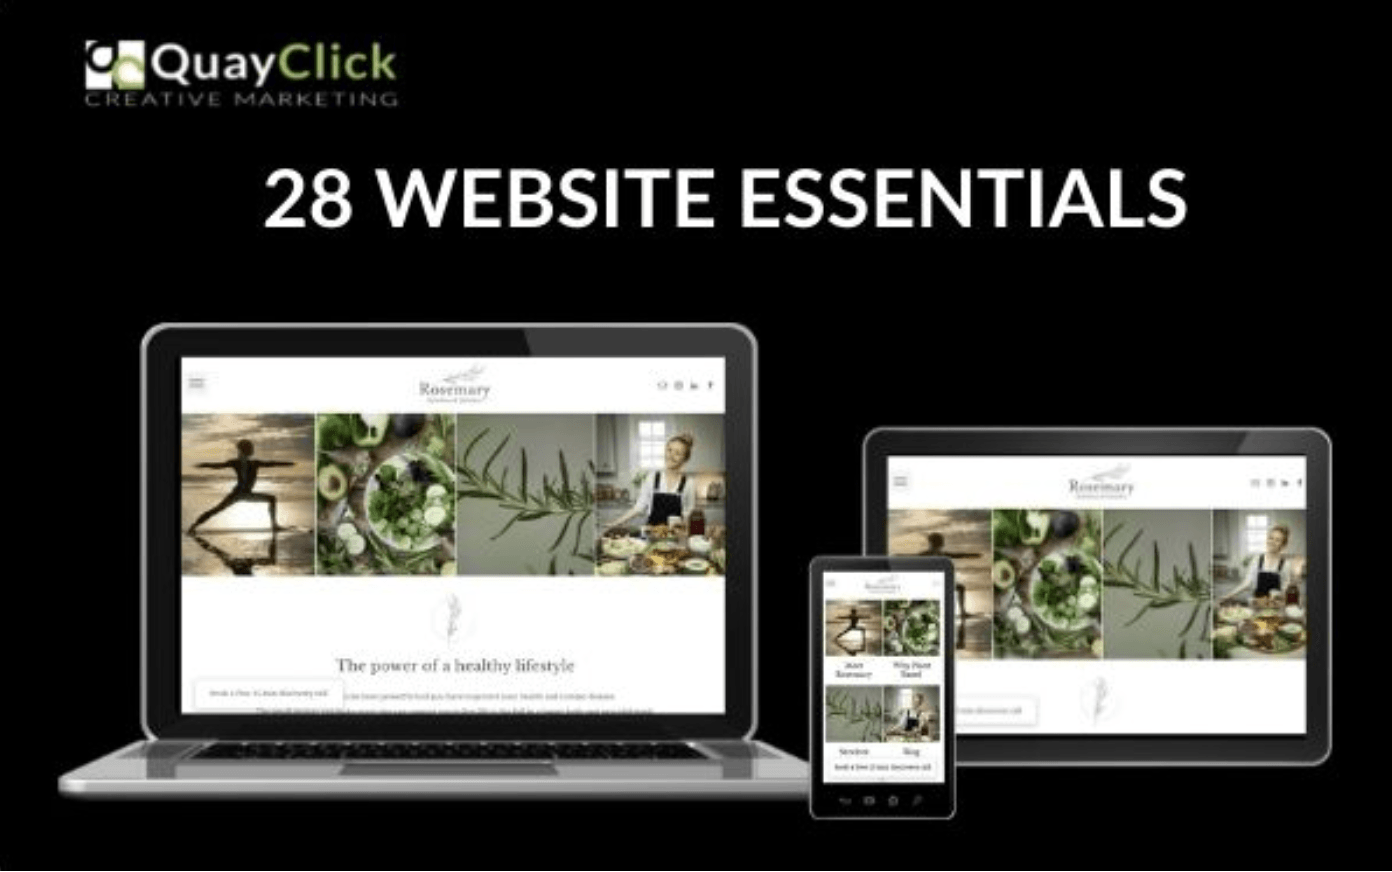 28 website essentials that every business owner needs to know